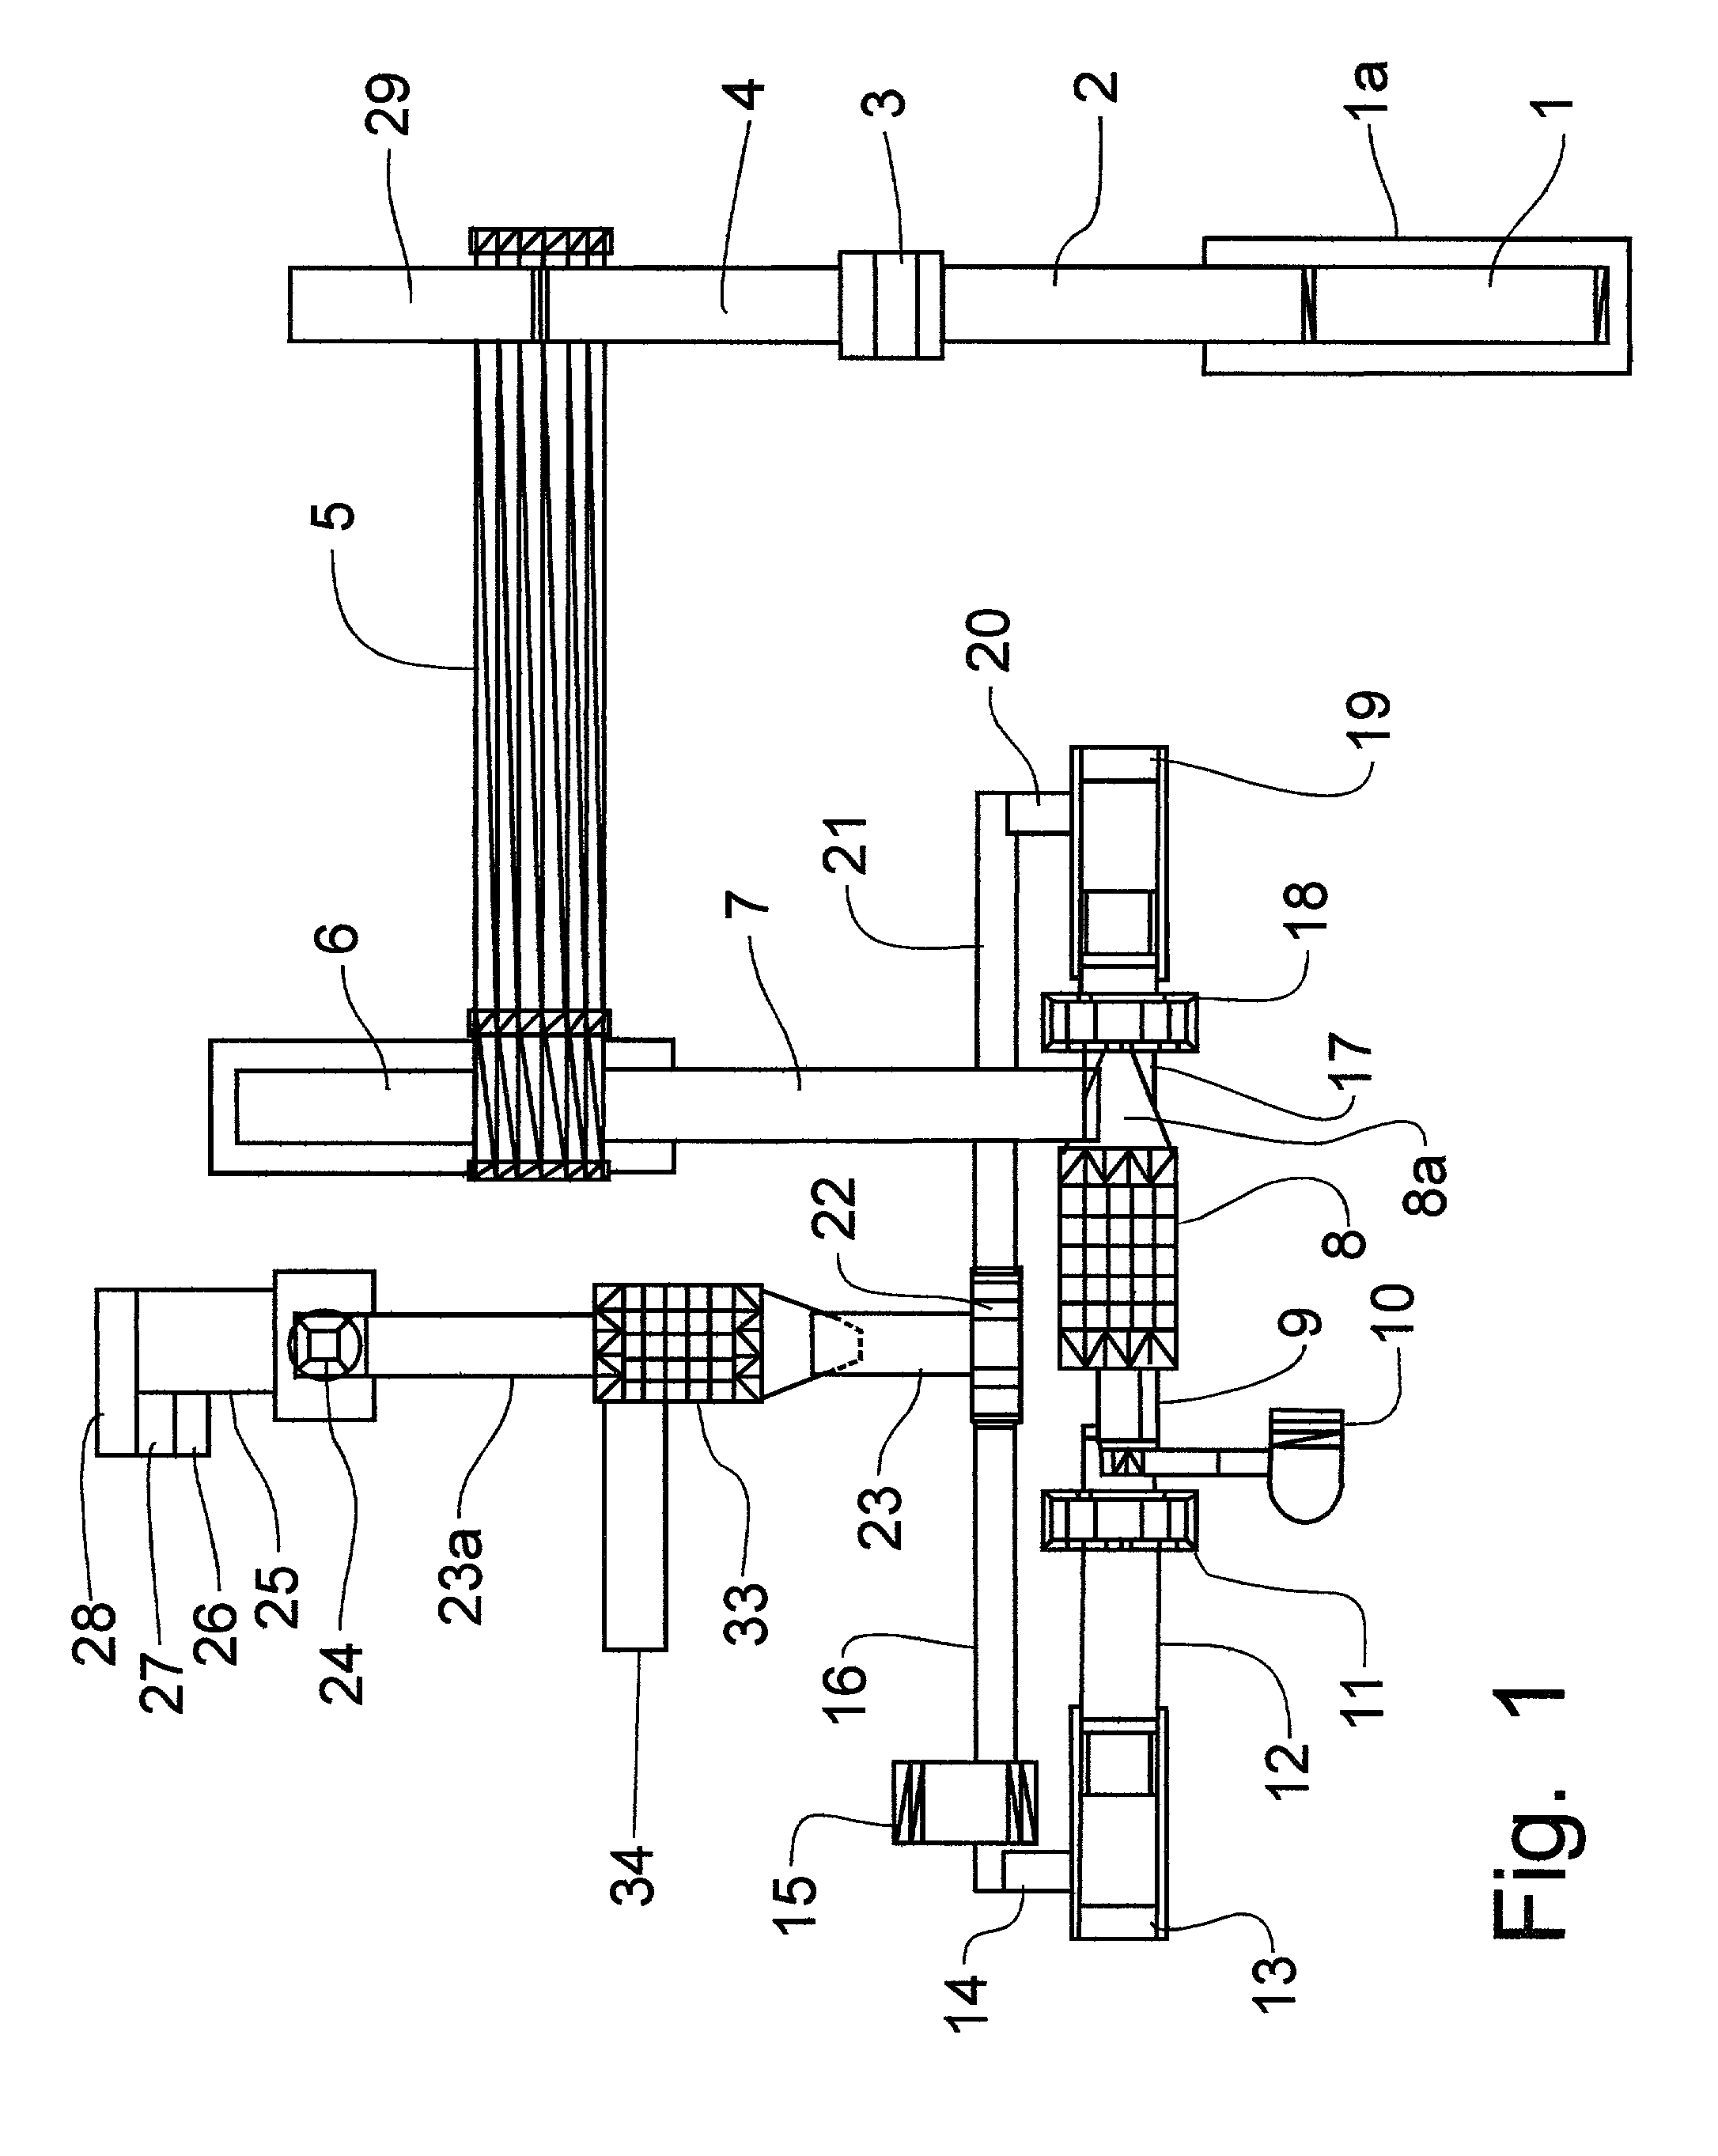 Method and apparatus for processing municipal waste